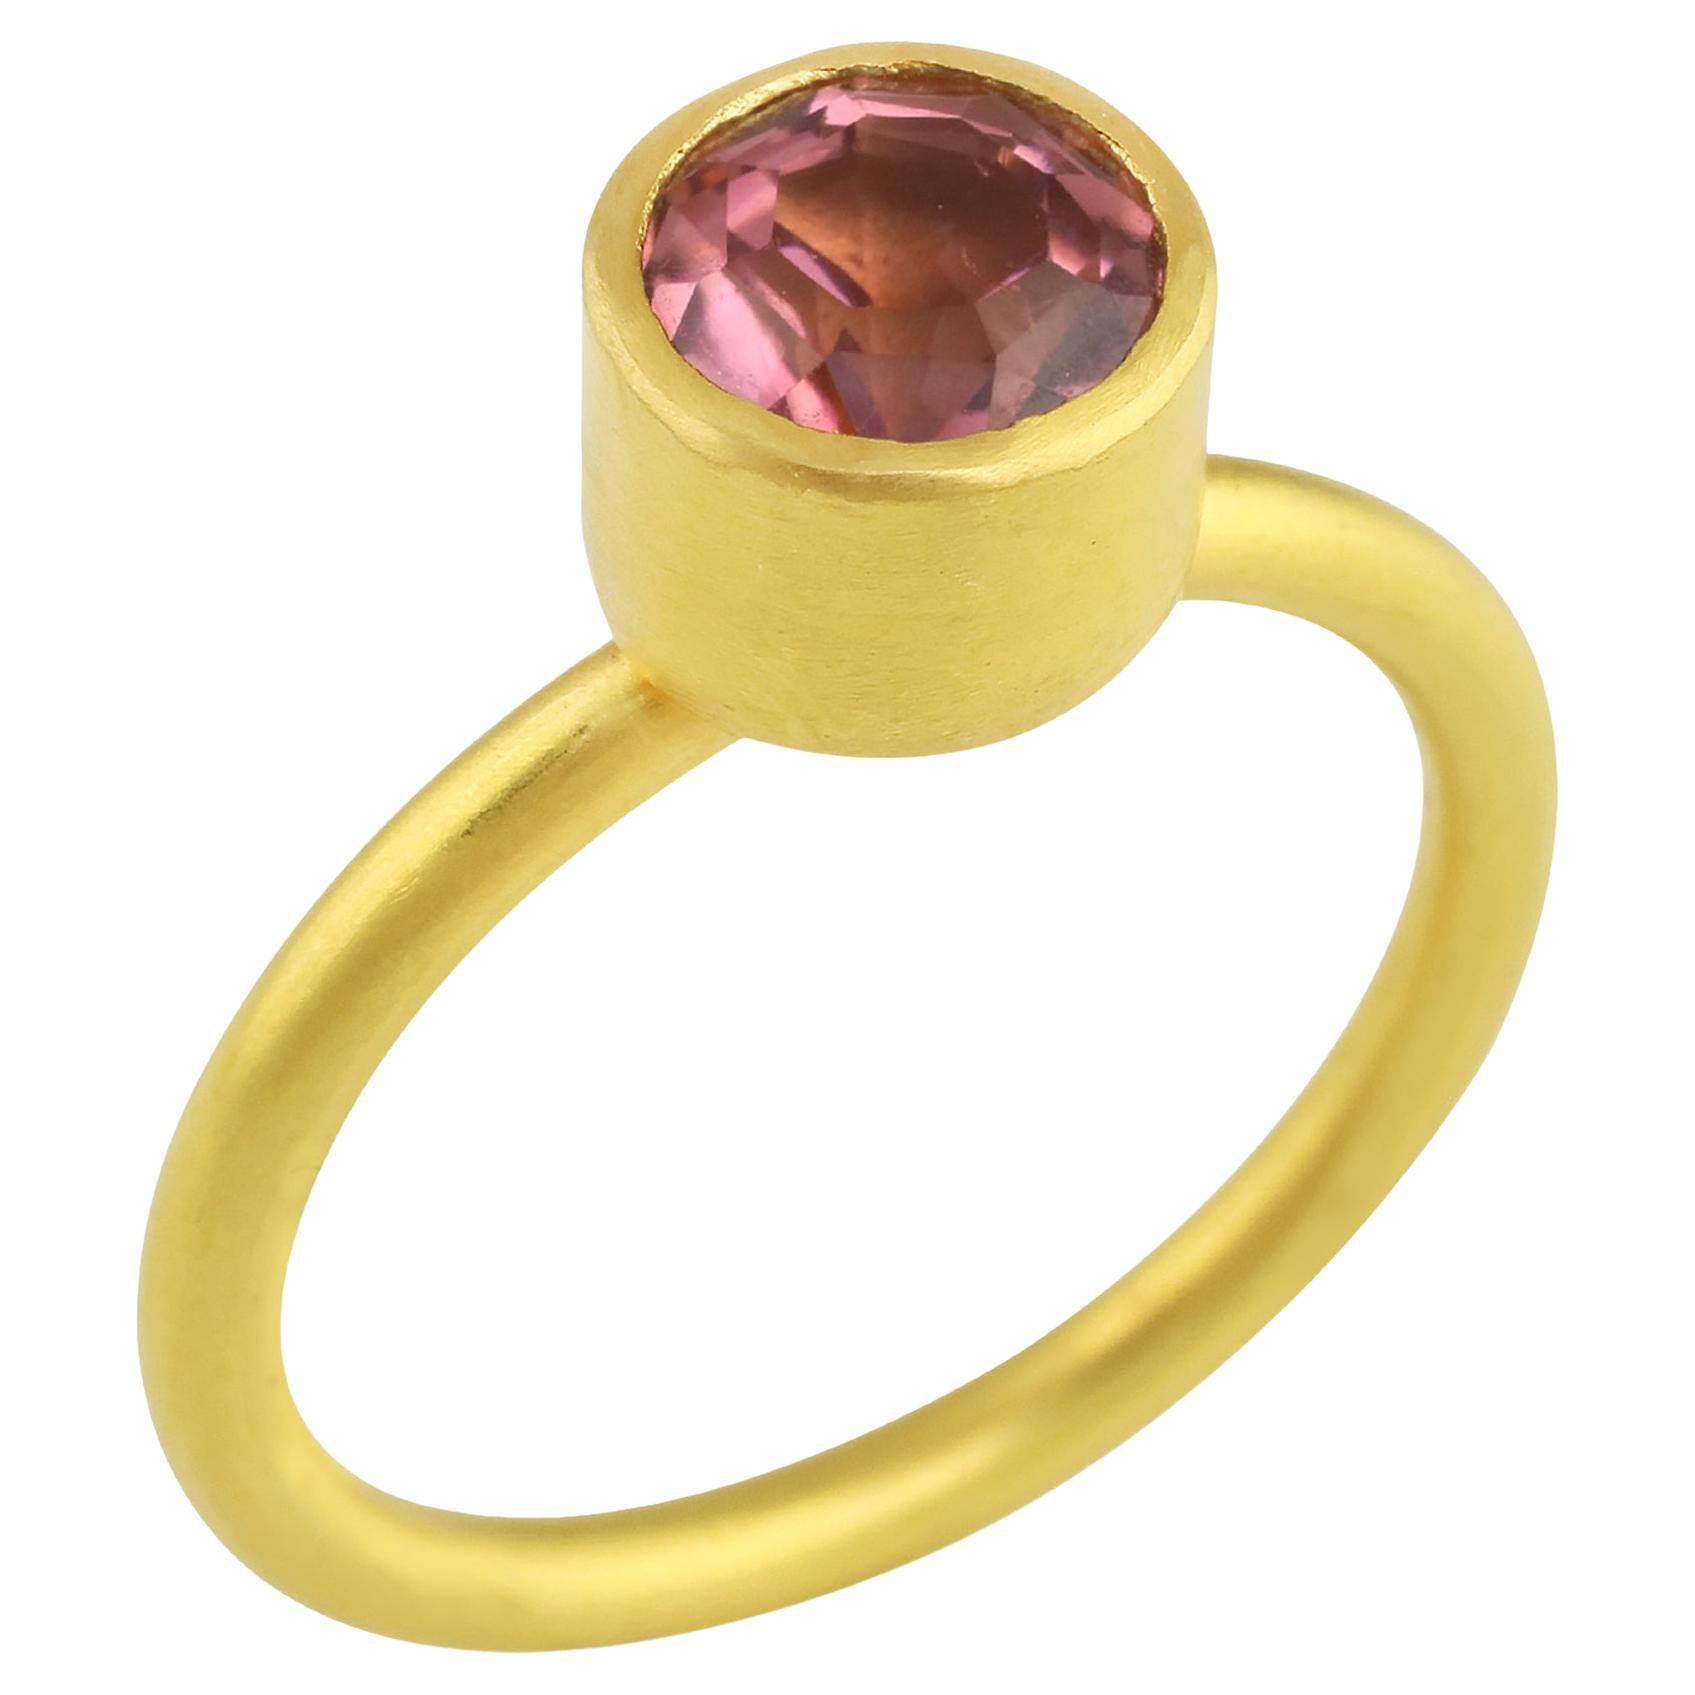 PHILIPPE SPENCER 1.87 Ct. Pink Tourmaline in 22K and 20K Gold Solitaire Ring For Sale